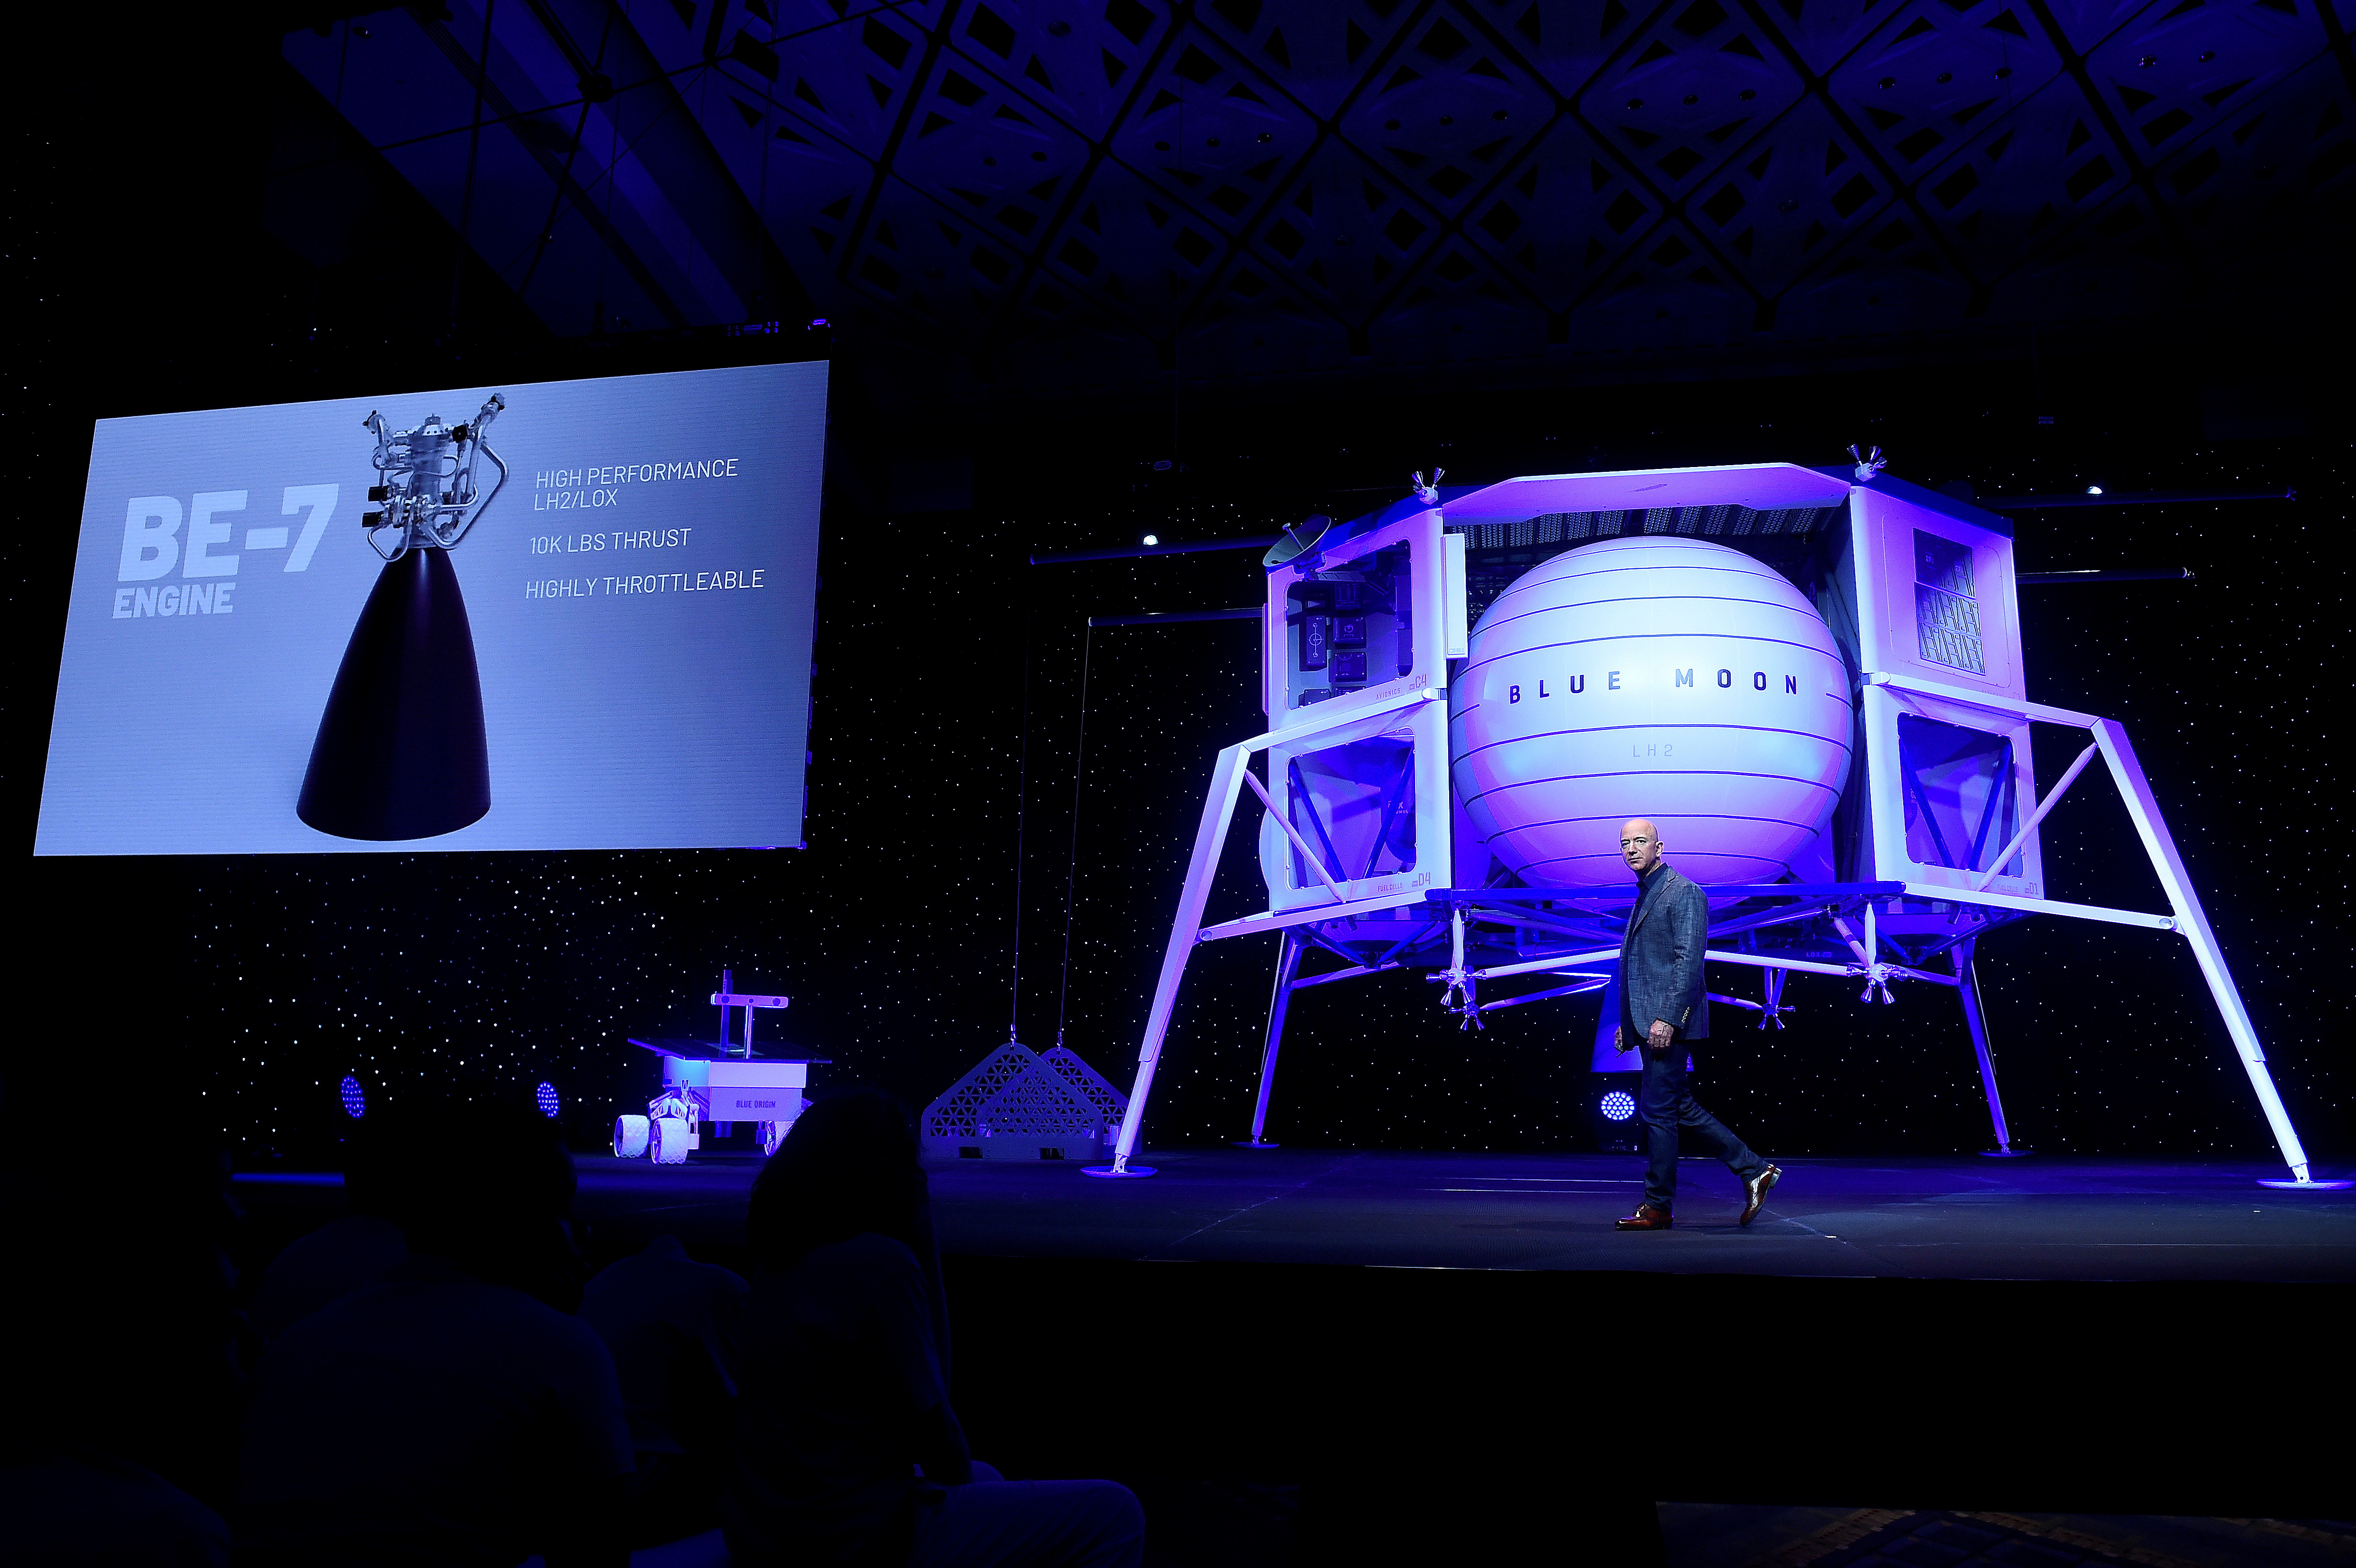 Founder, Chairman, CEO and President of Amazon Jeff Bezos unveils the BE-7 rocket engine that his space company Blue Origin's space exploration lunar lander rocket called Blue Moon will use during an unveiling event in Washington